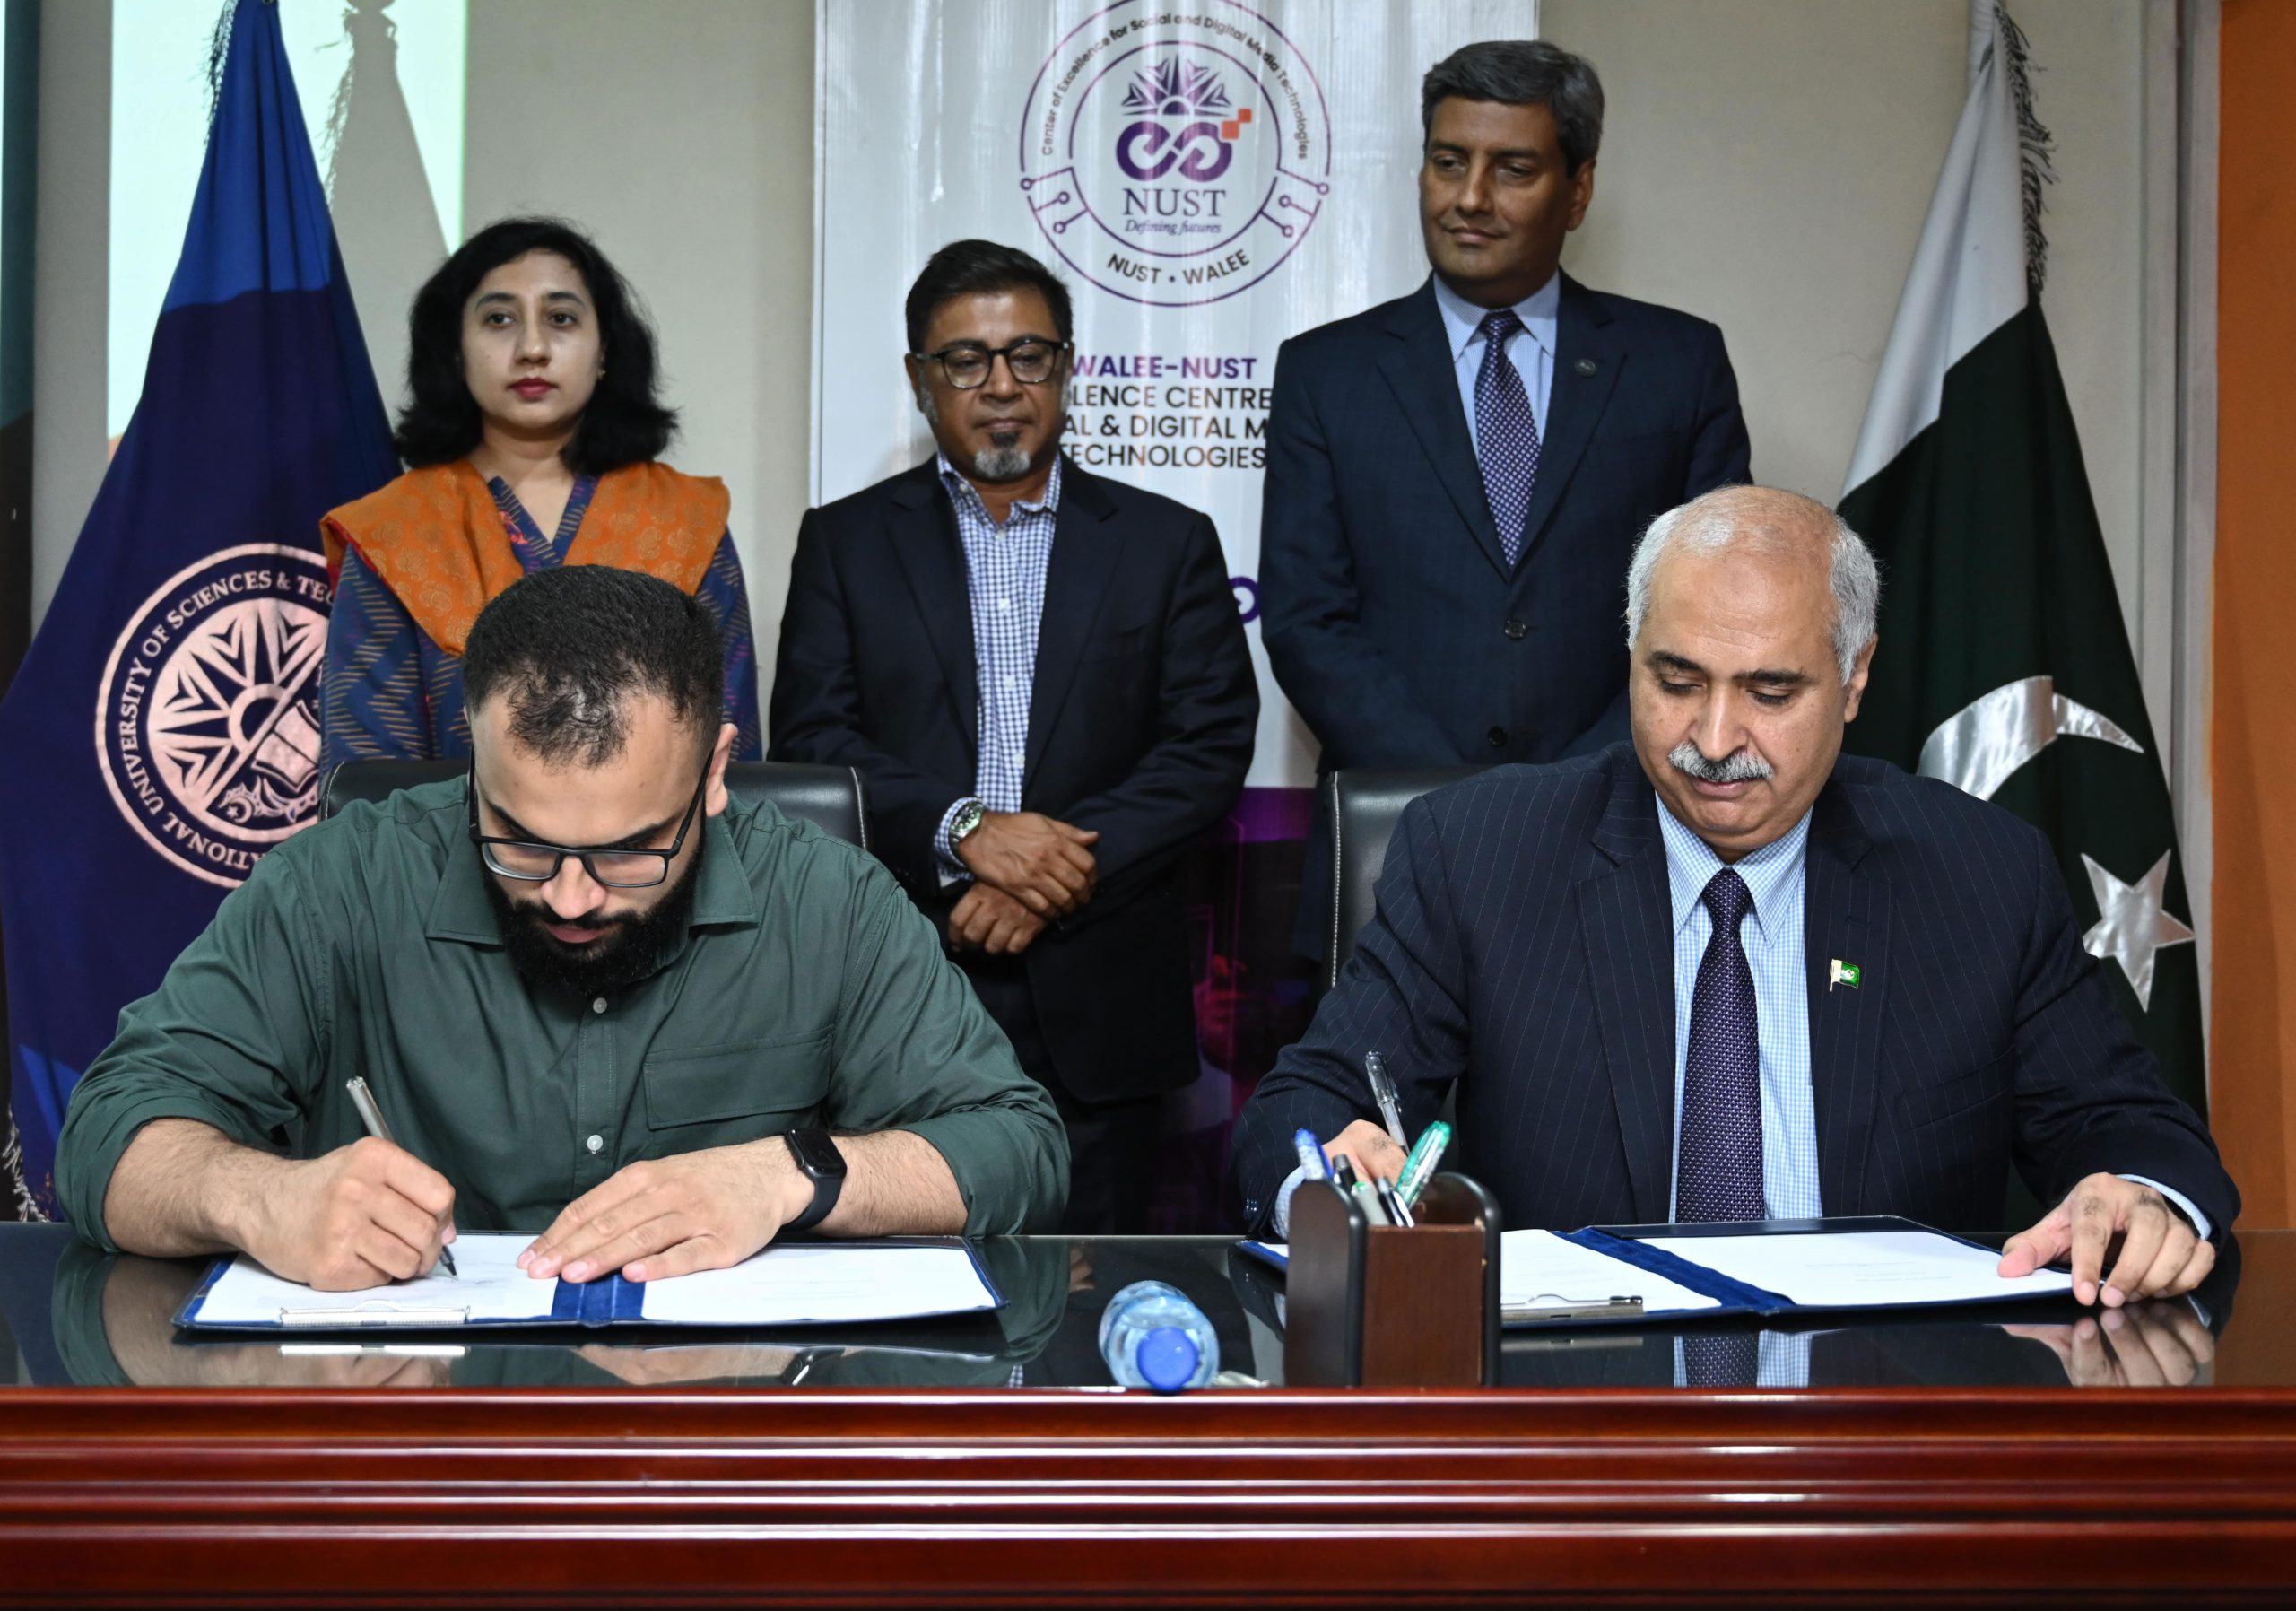 CEO Walee and NUST-SEECS sign an agreement to set up CoE